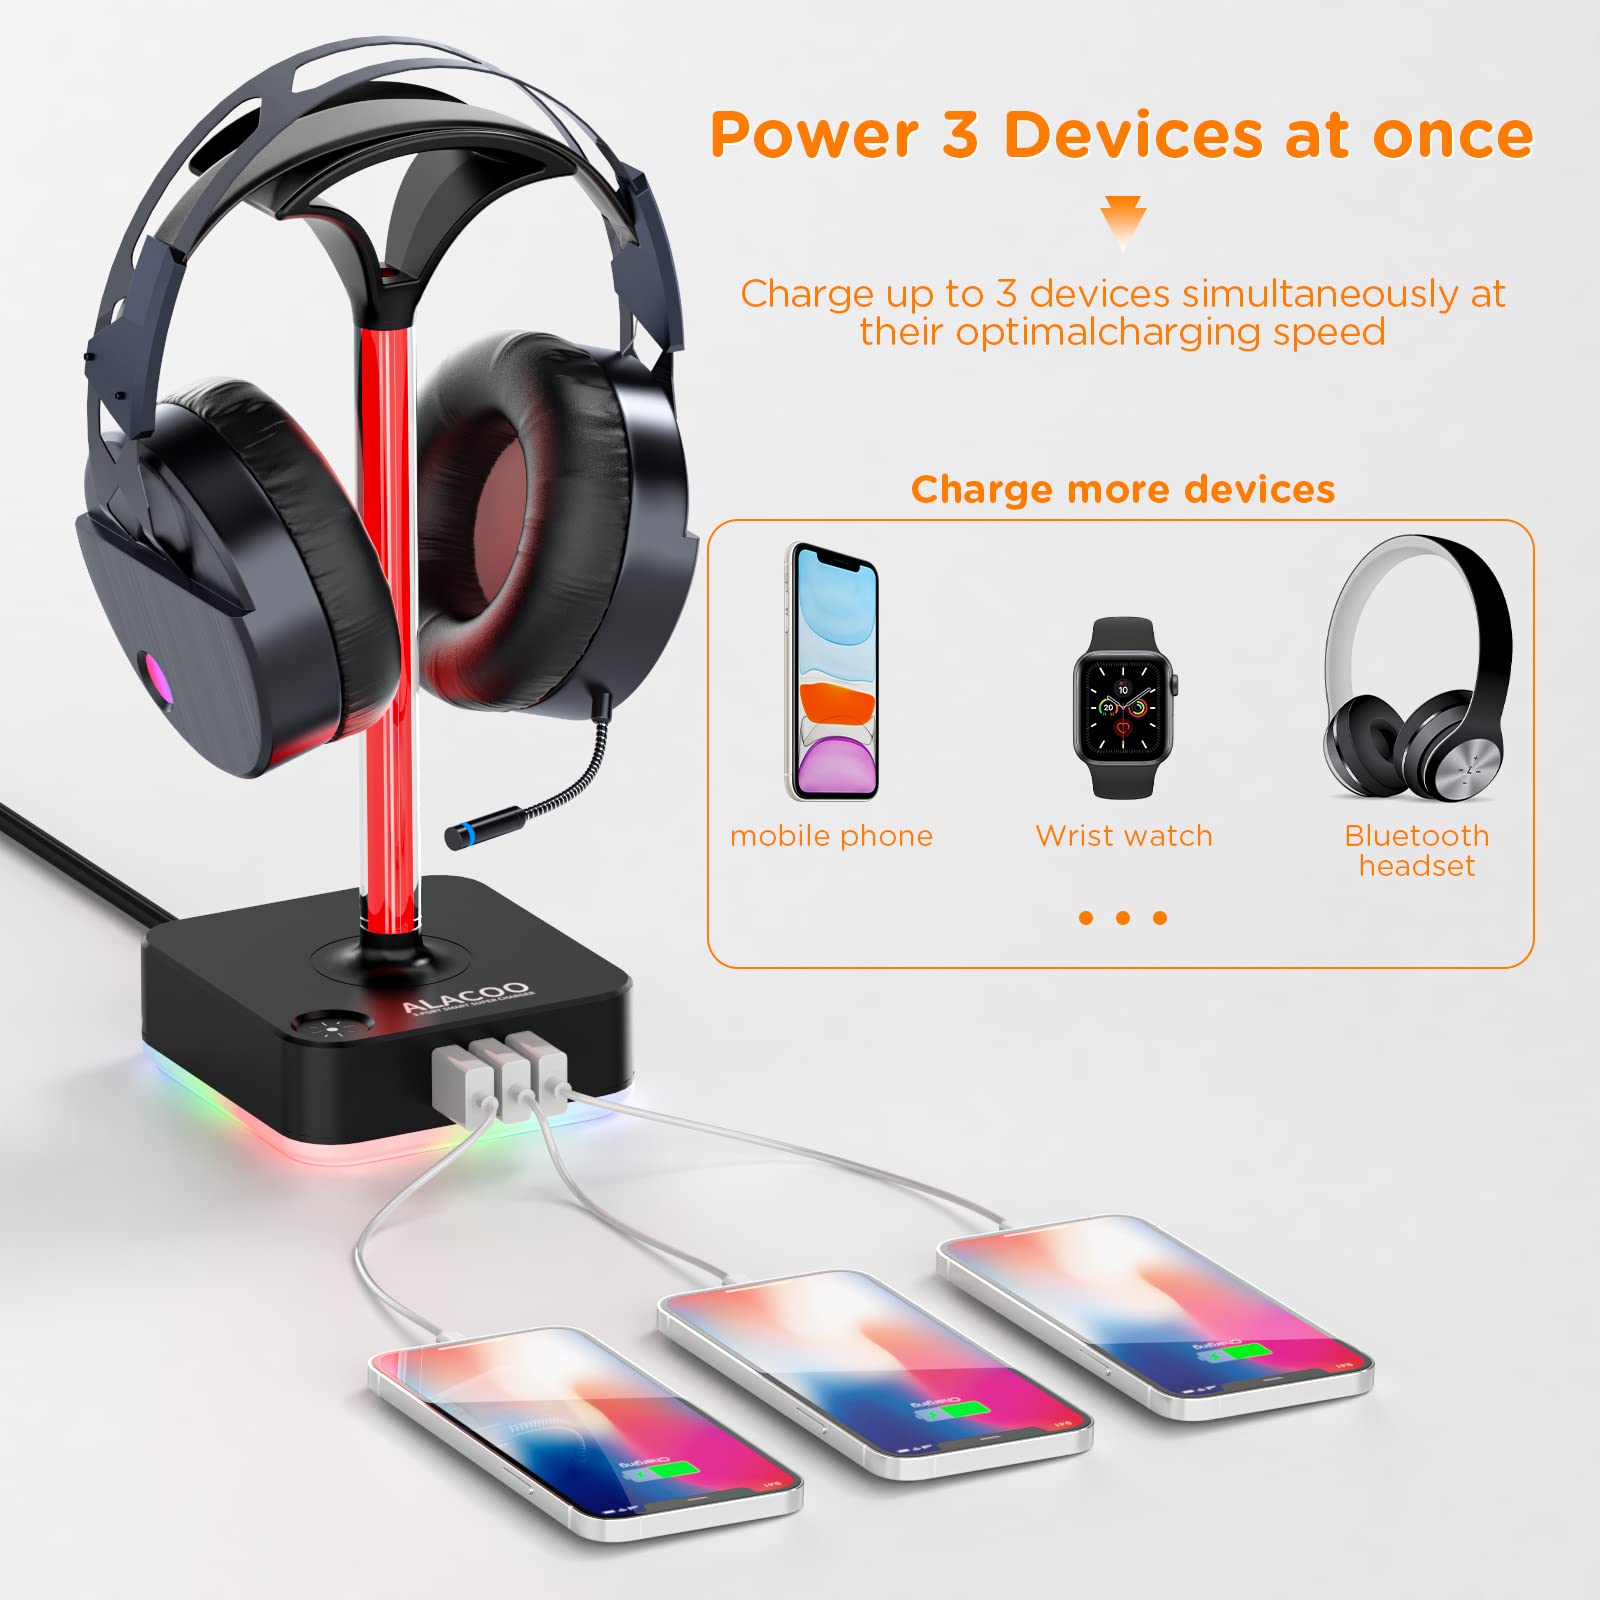 Headphone Stand-Headset Holder--RGB Gaming Headset Stand with 3USB Charging Port and 2 Prong AC Outlet Power Strips, 8 Light Modes and Non-Slip Rubber Base, Gamers Desktop Game Earphone Accessories.